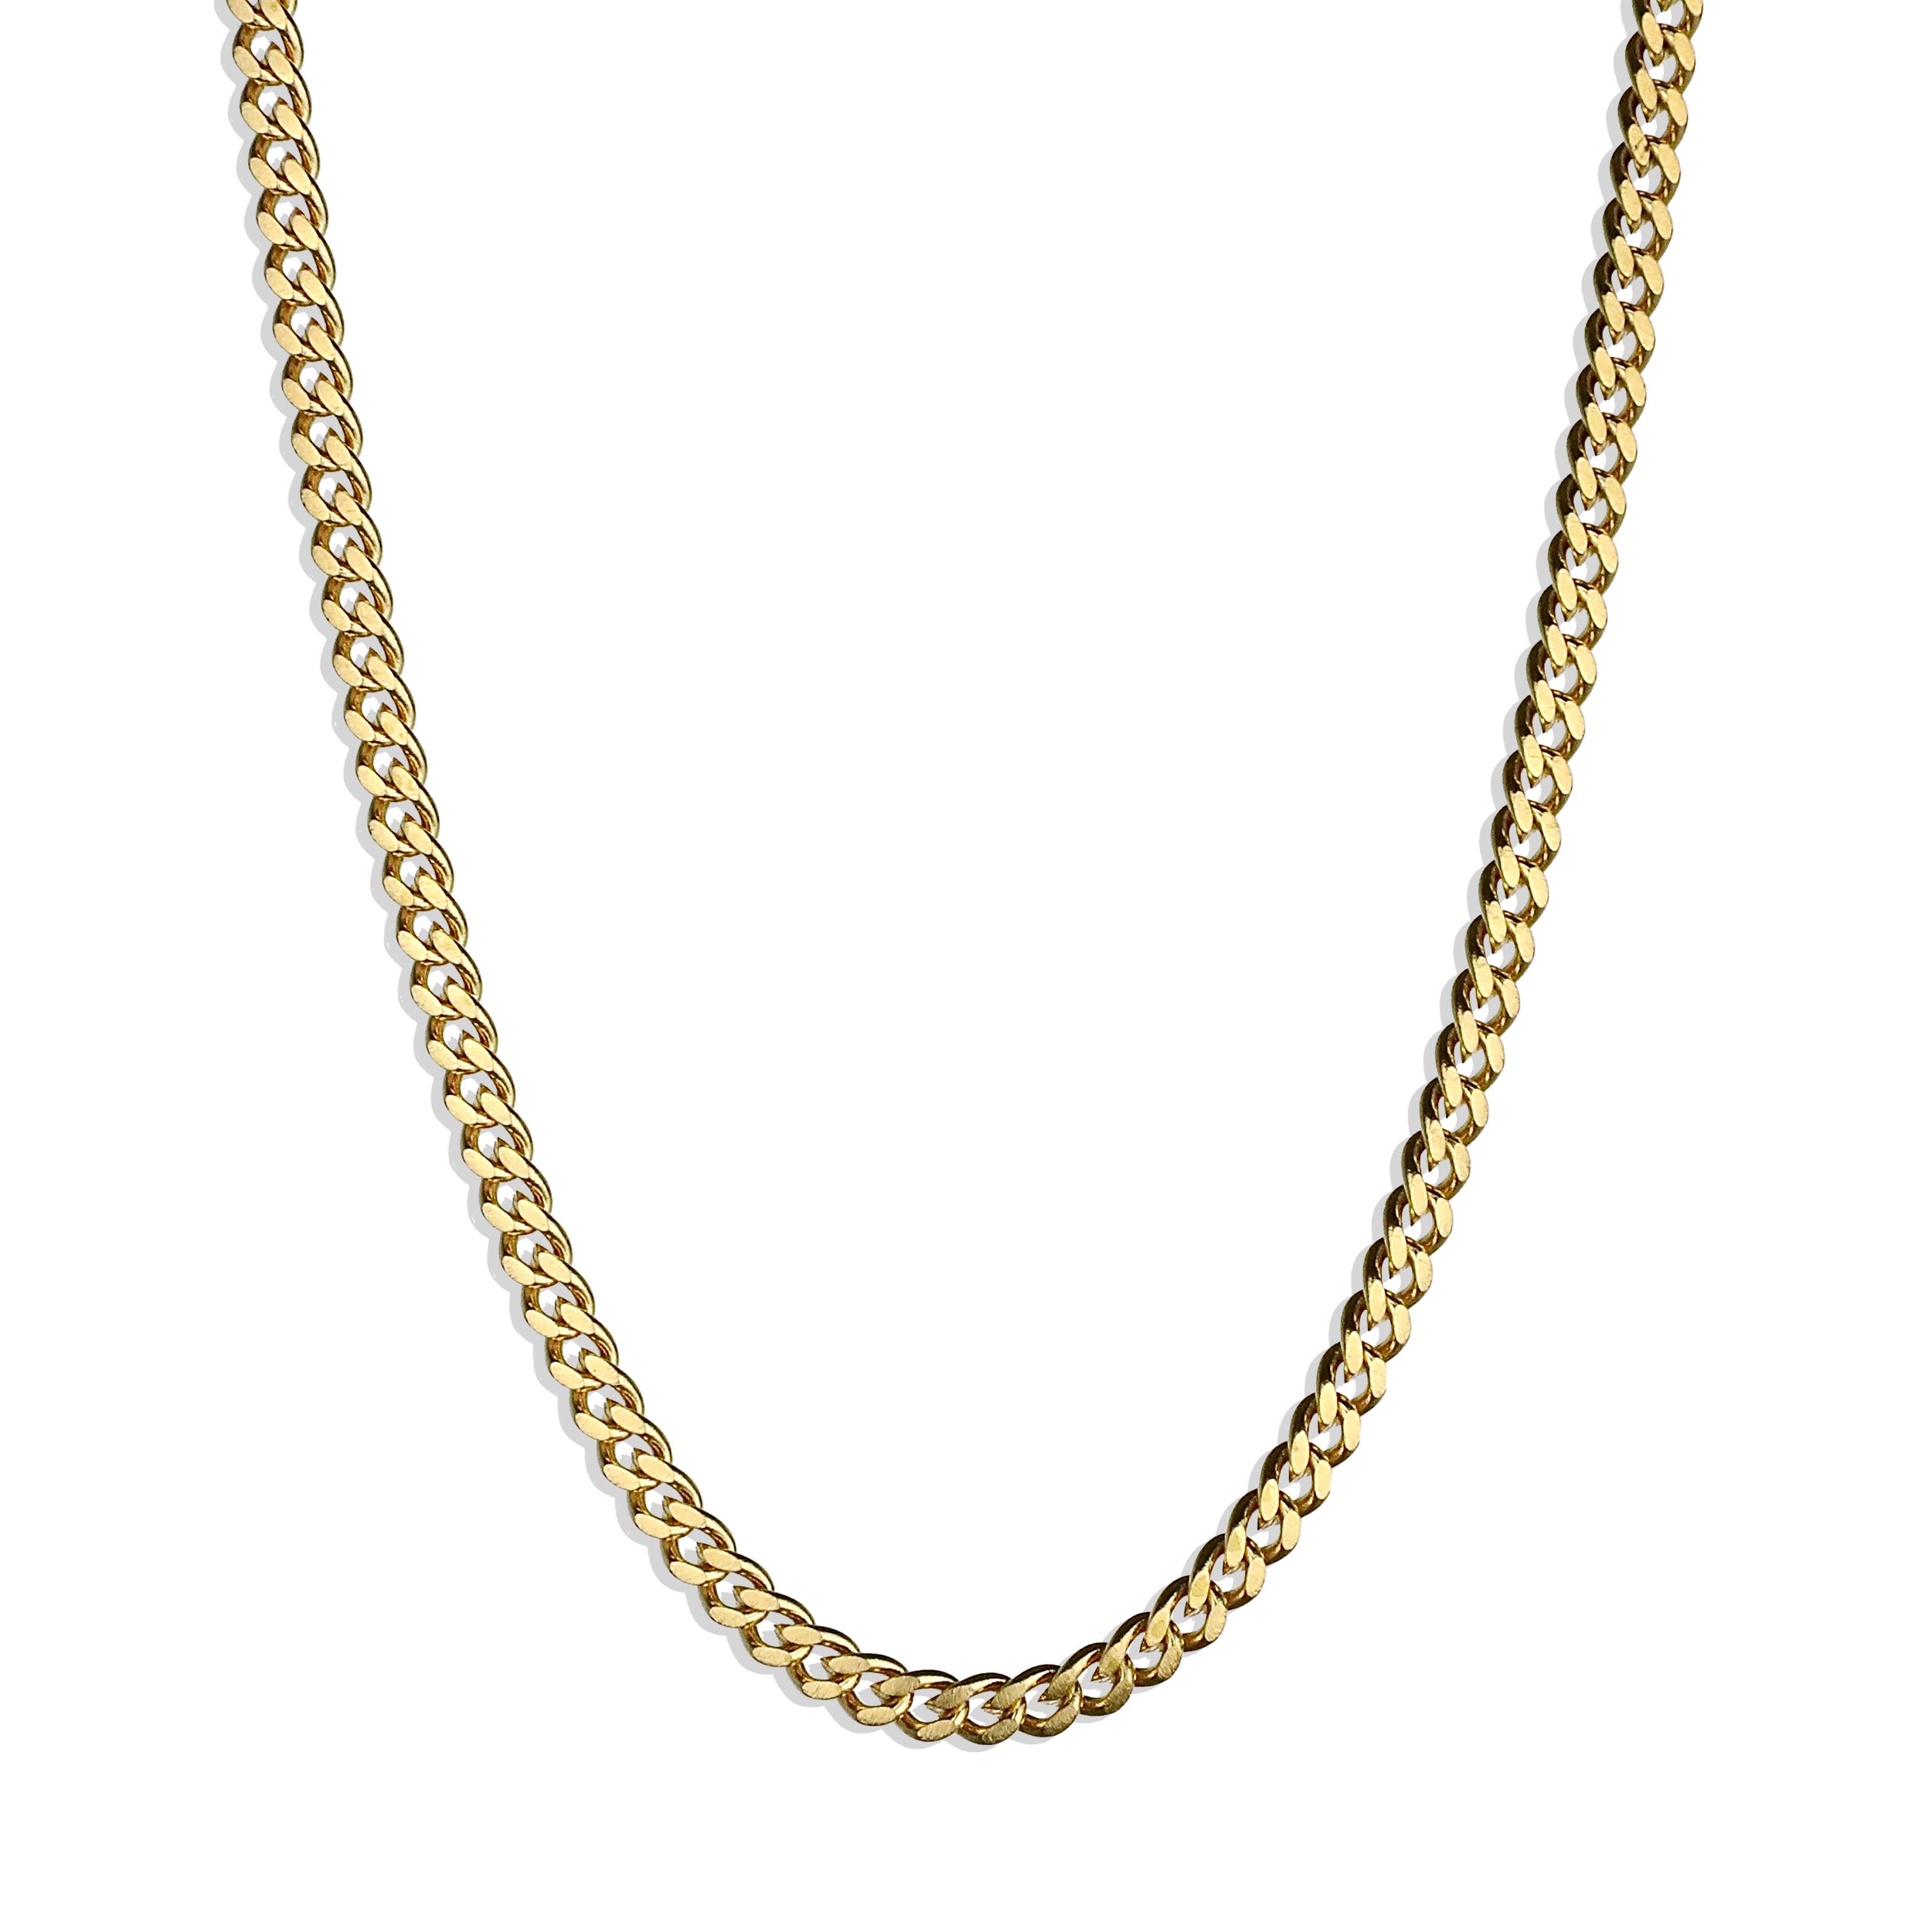 Cuban Chain Necklace - Gold 3mm